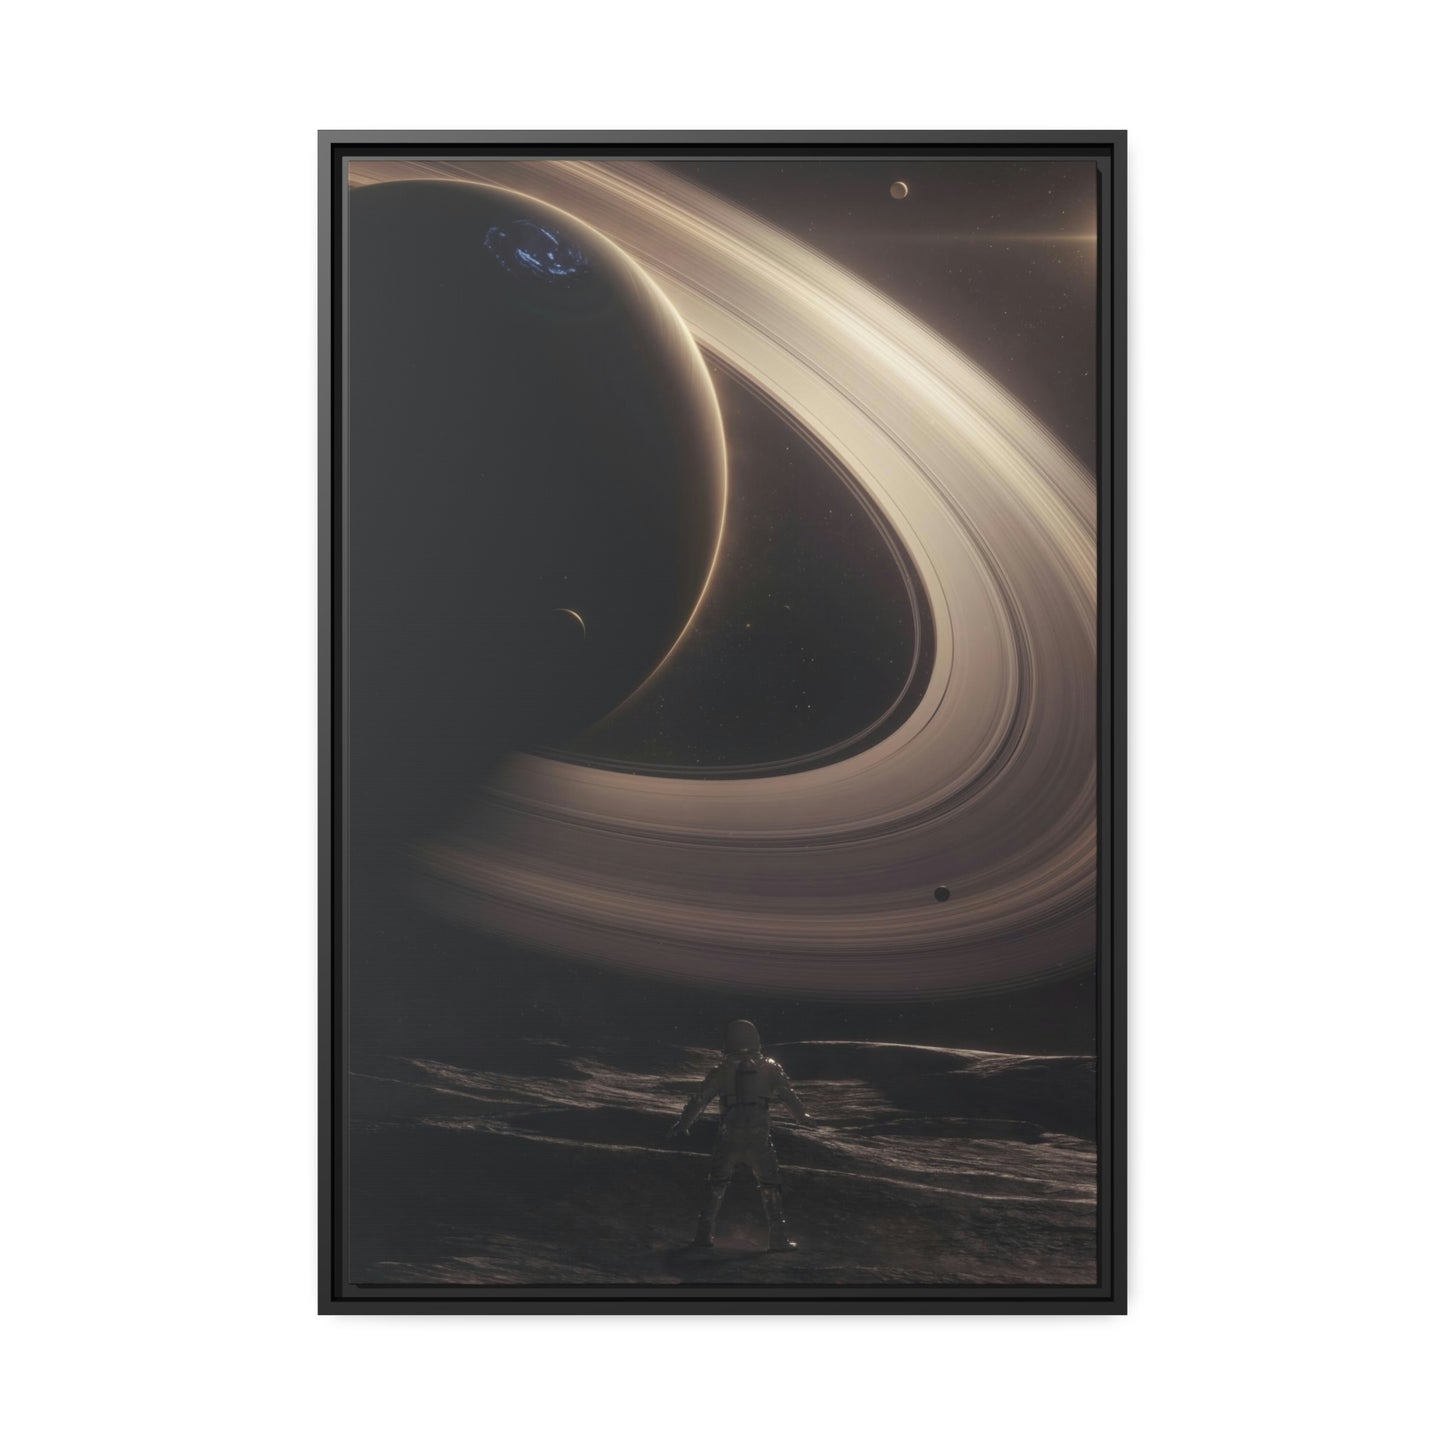 Admiration of the Rings - Gallery Grade Canvas In Floater Frame by VoidSeven